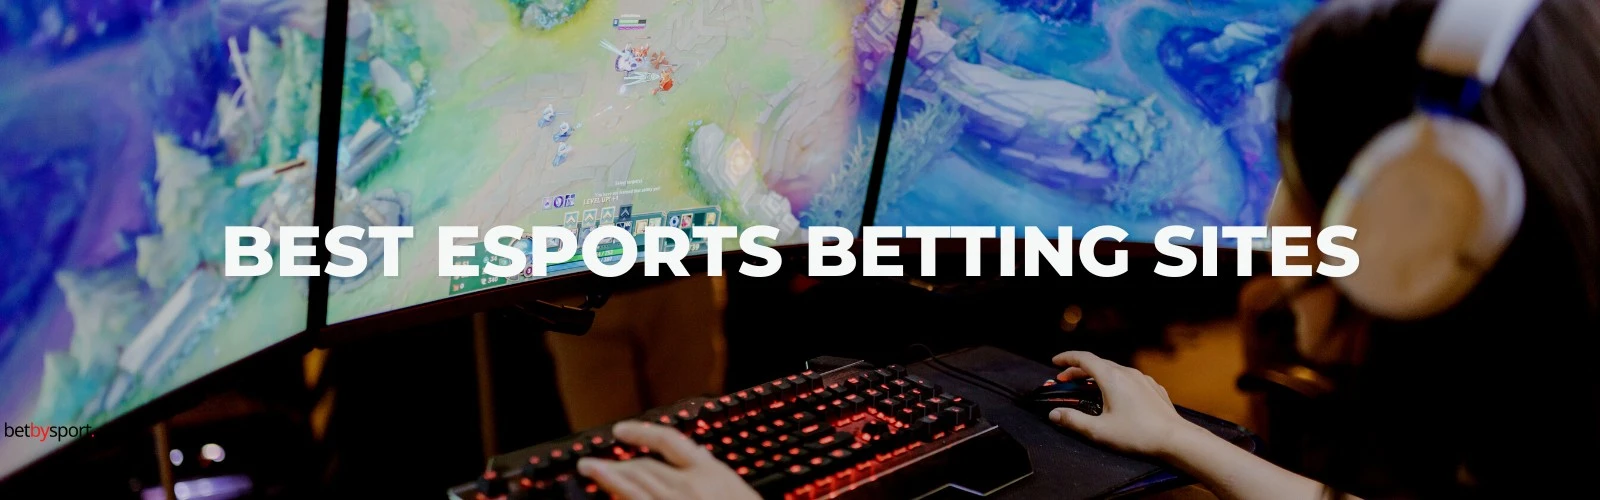 Esports Betting Sites - All You Need to Know